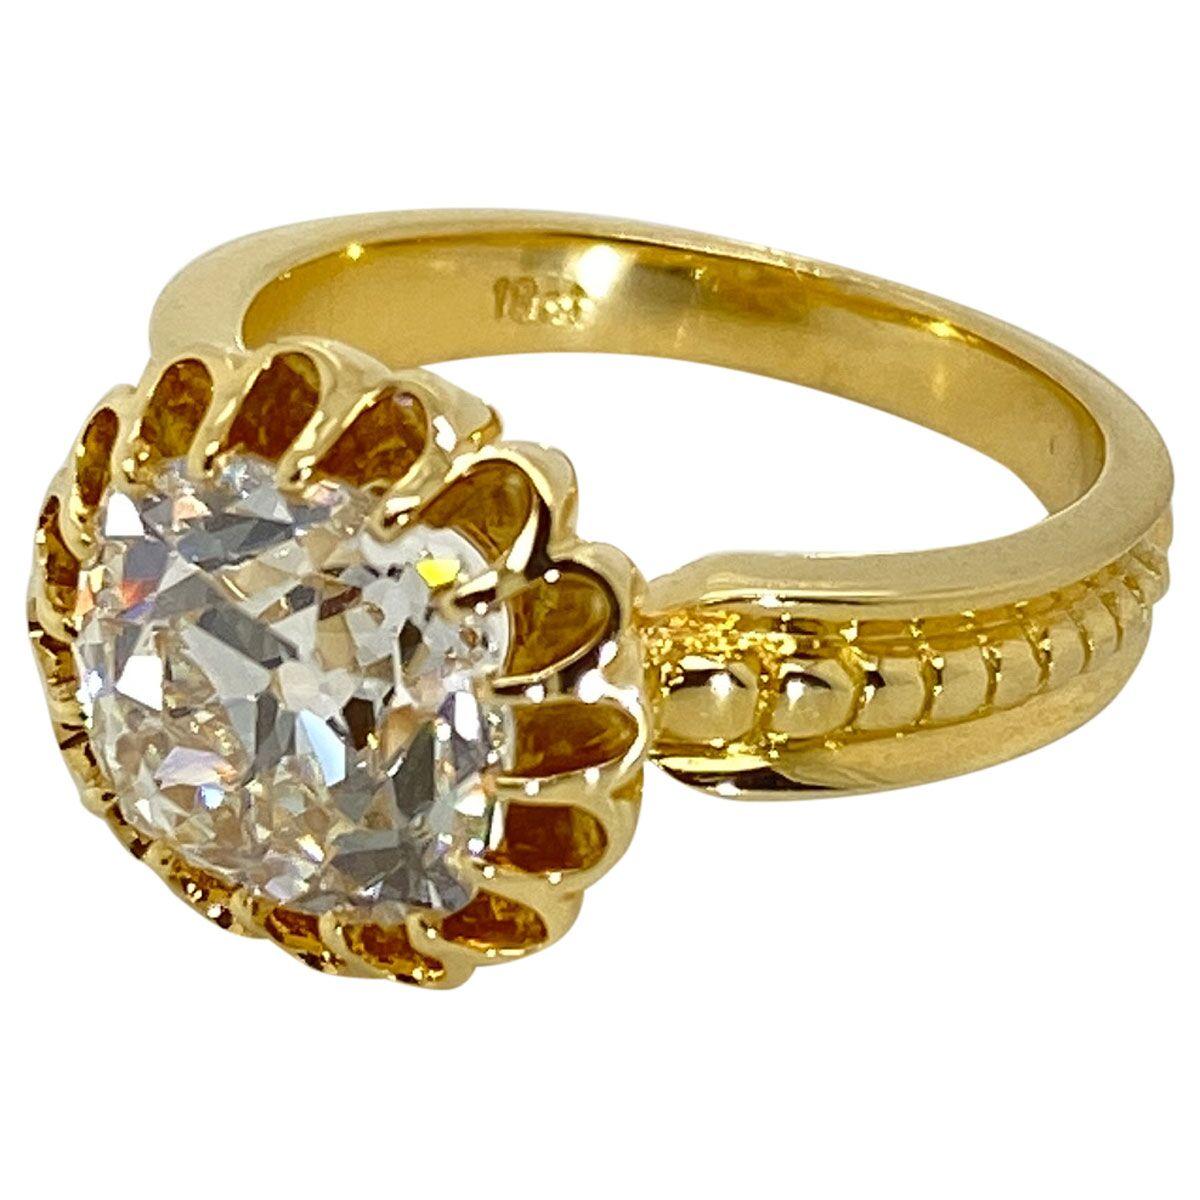 Romantic, charming and captivating - this beautiful 3.20ct old mine cut diamond has been reinvigorated in a new 18k yellow gold buttercup setting. The diamond is such a stand out, it's hard to find beautiful old cut diamonds like this - a GIA